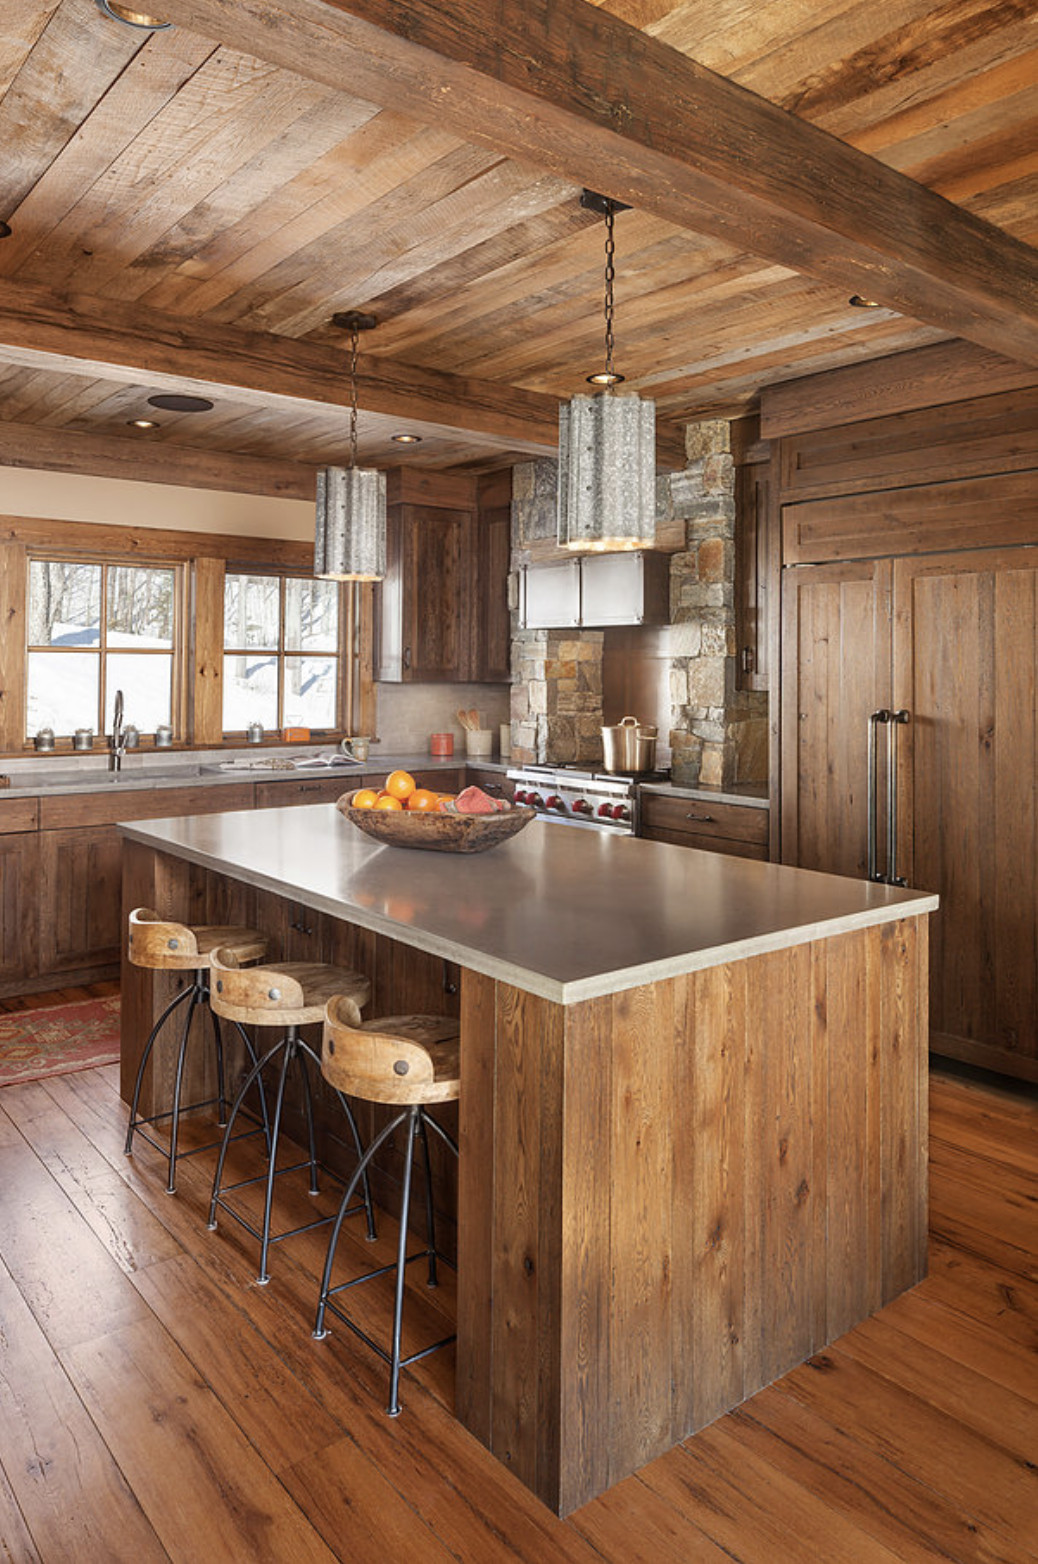 Rustic Kitchen Hingham
 9 of Our Favorite Rustic Kitchens with Exposed Wood Beams